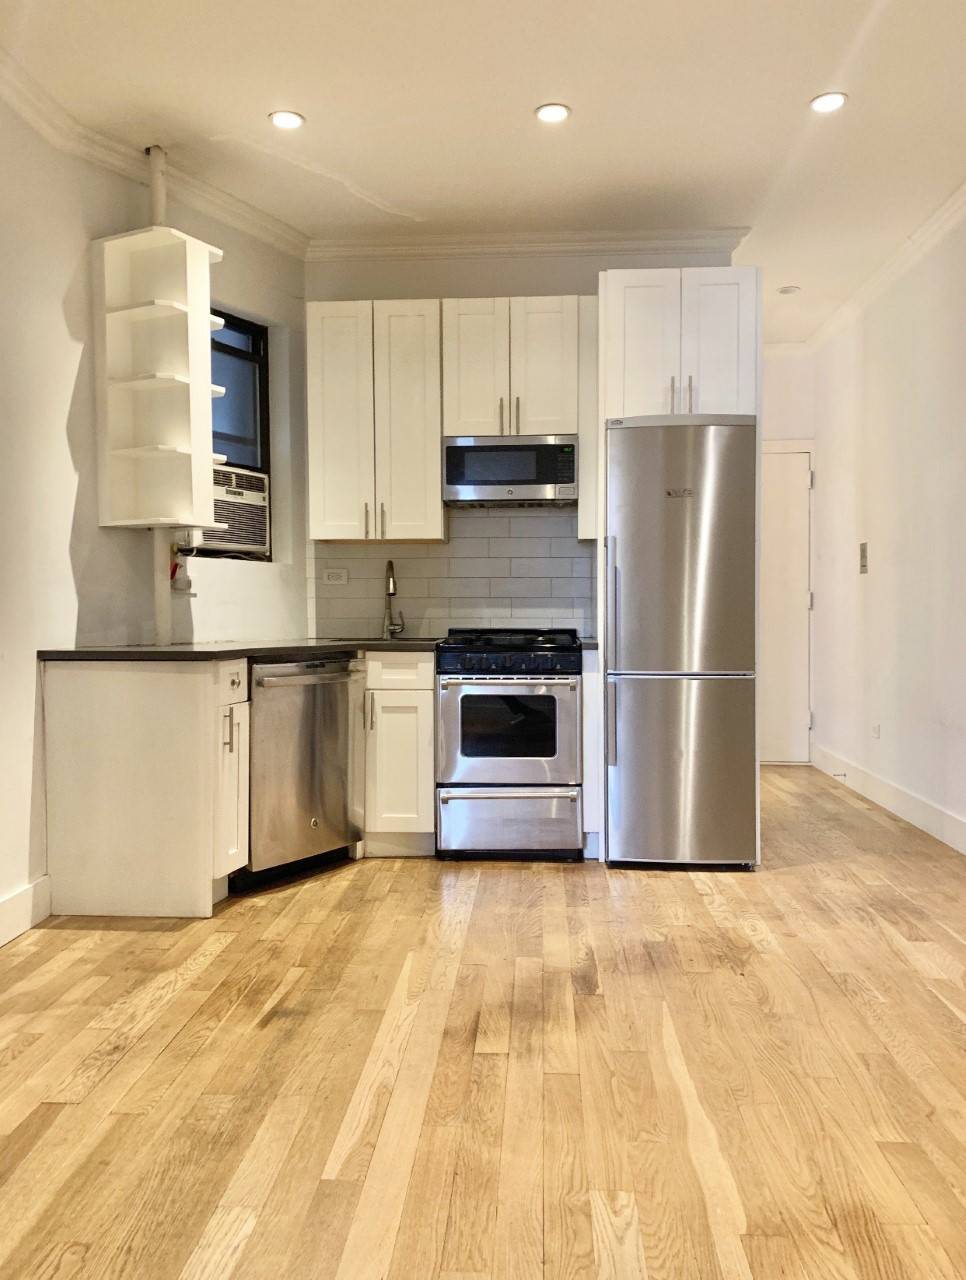 This is the ONLY available rental option in the ENTIRE Boerum Hill area with DISHWASHER and WASHER DRYER in unit under 3, 000.